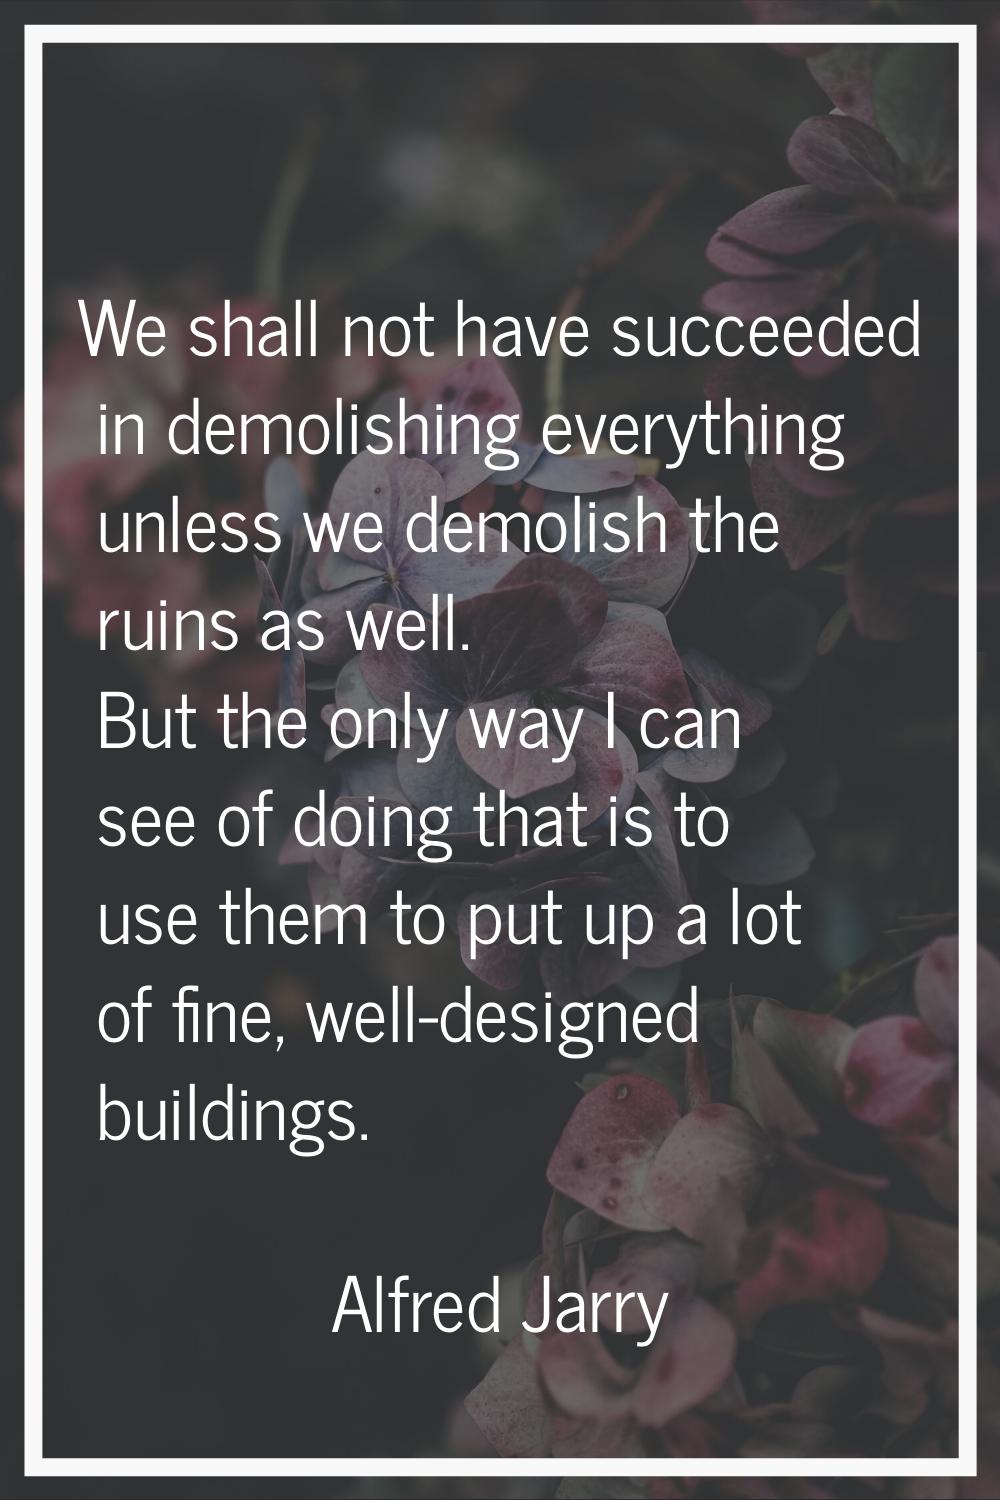 We shall not have succeeded in demolishing everything unless we demolish the ruins as well. But the